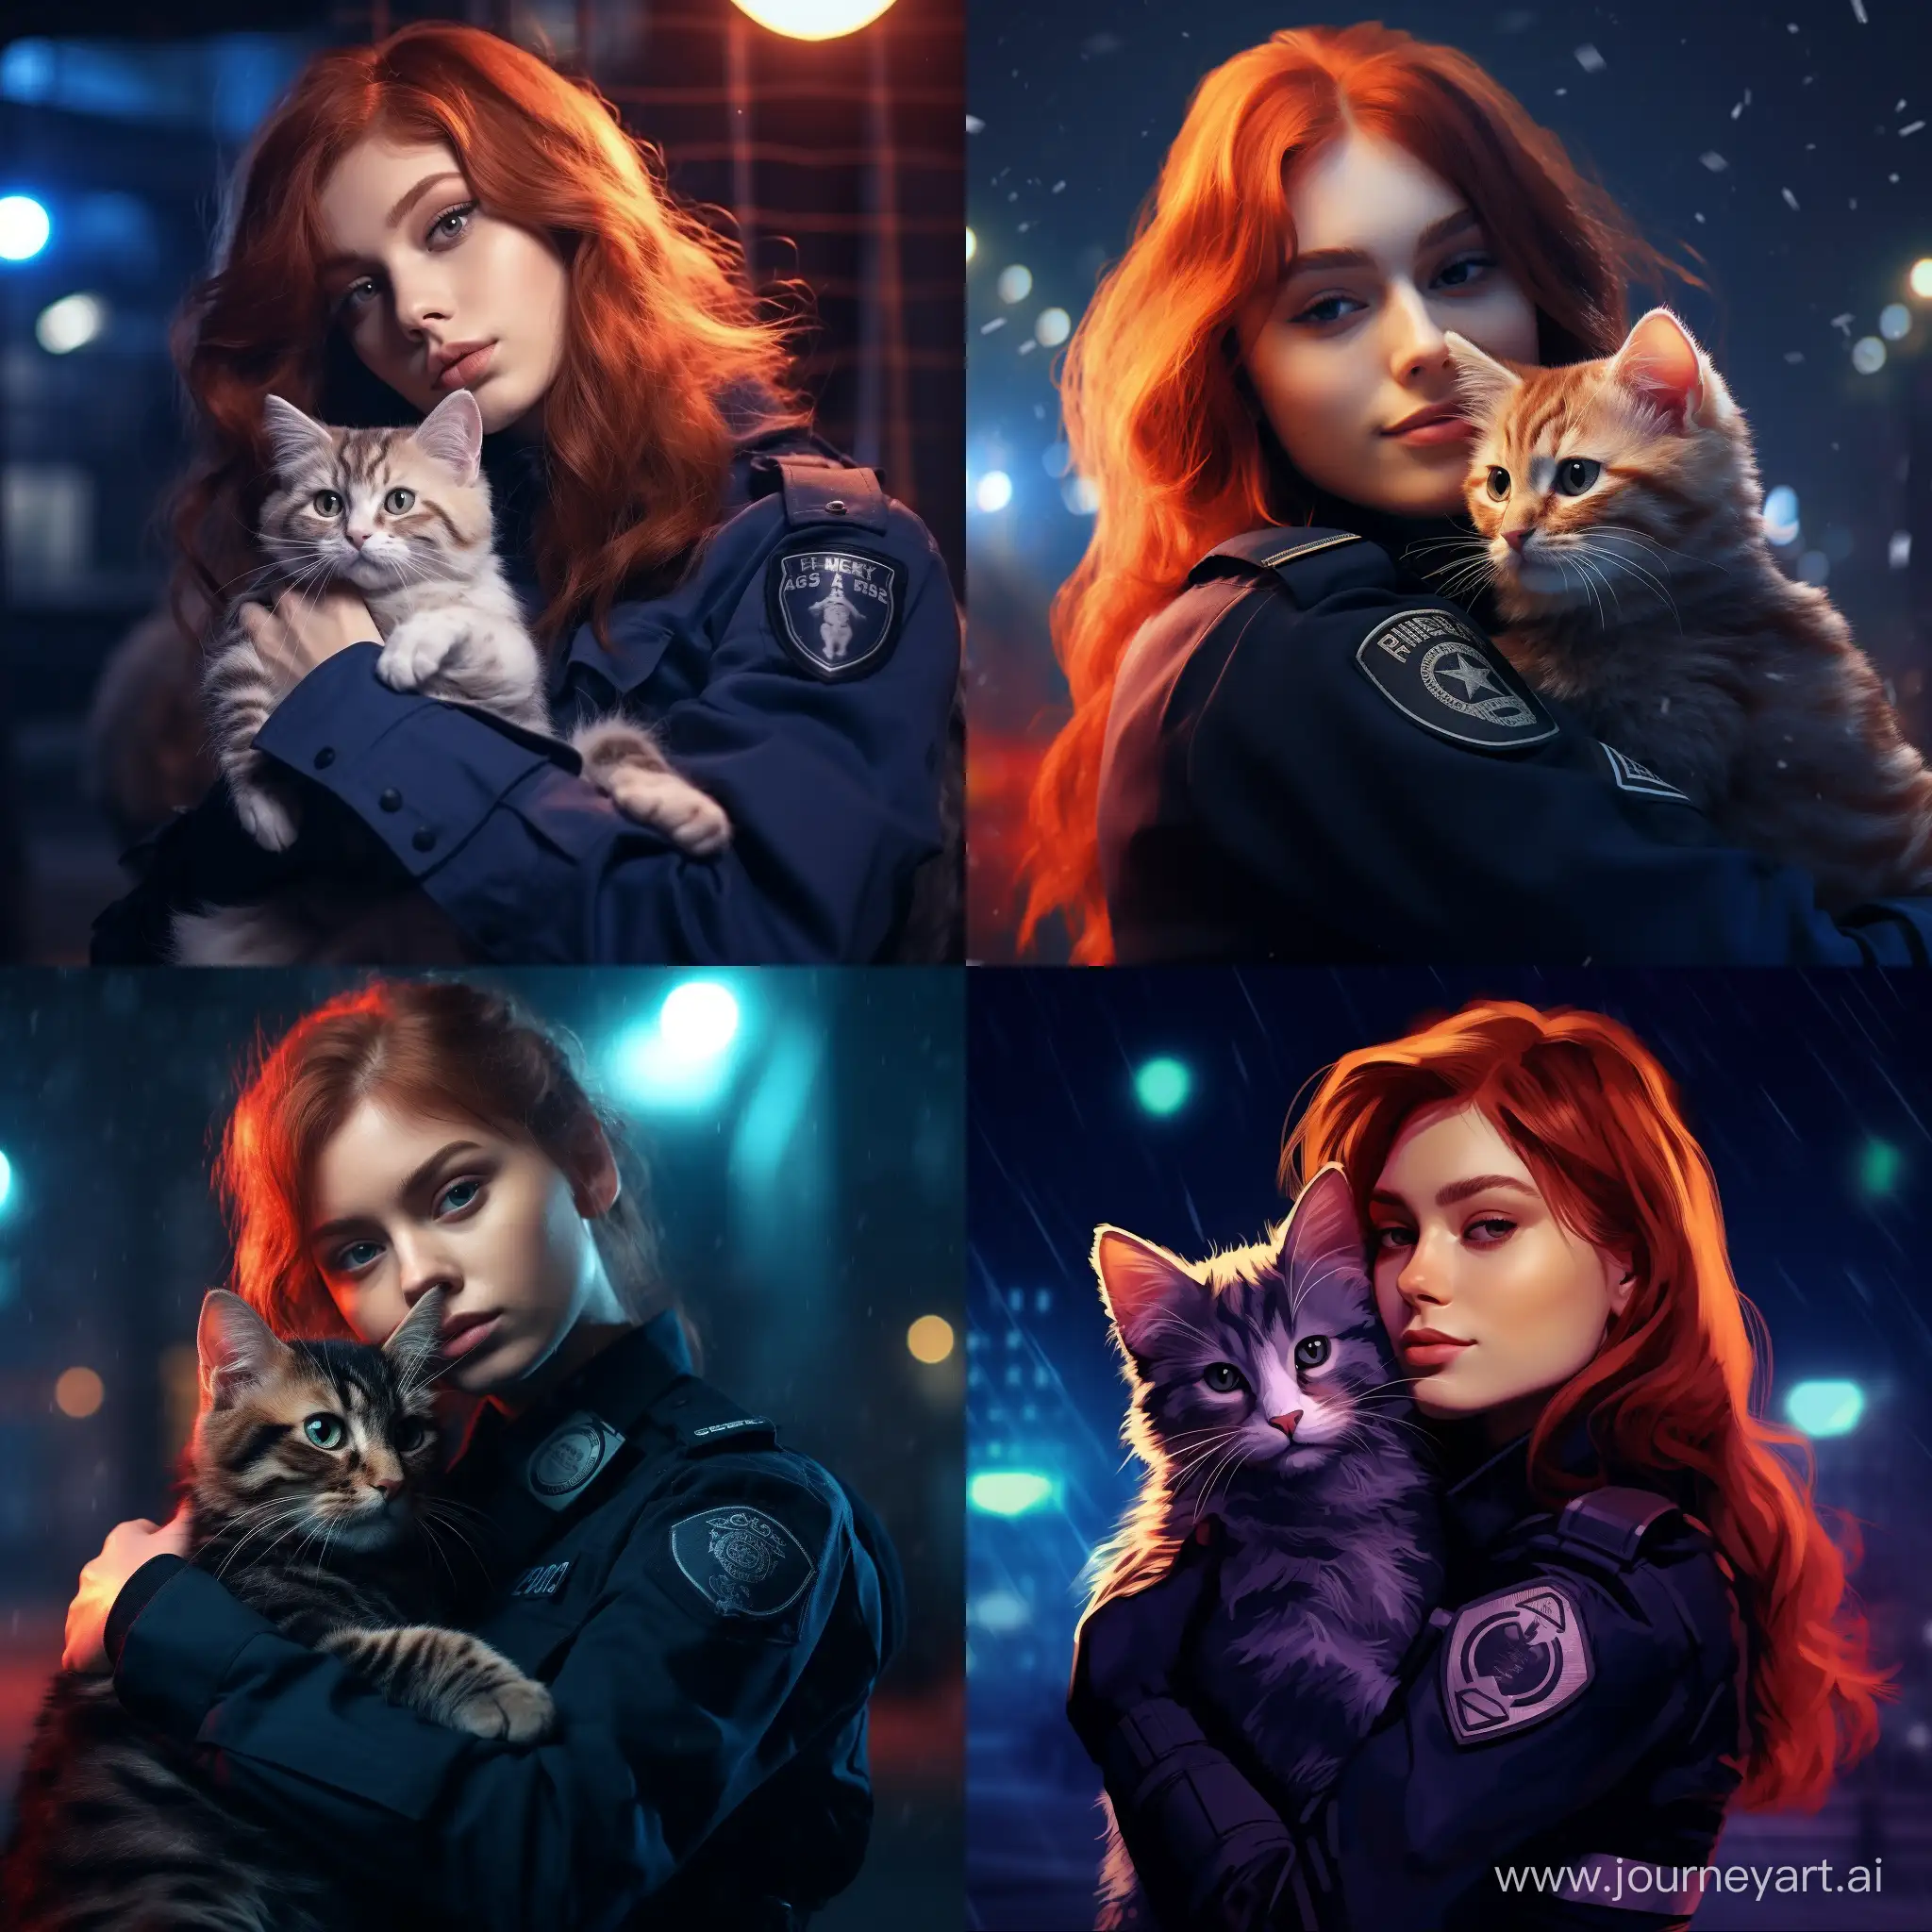 RedHaired-Policewoman-Embracing-a-Cat-on-a-Winter-Night